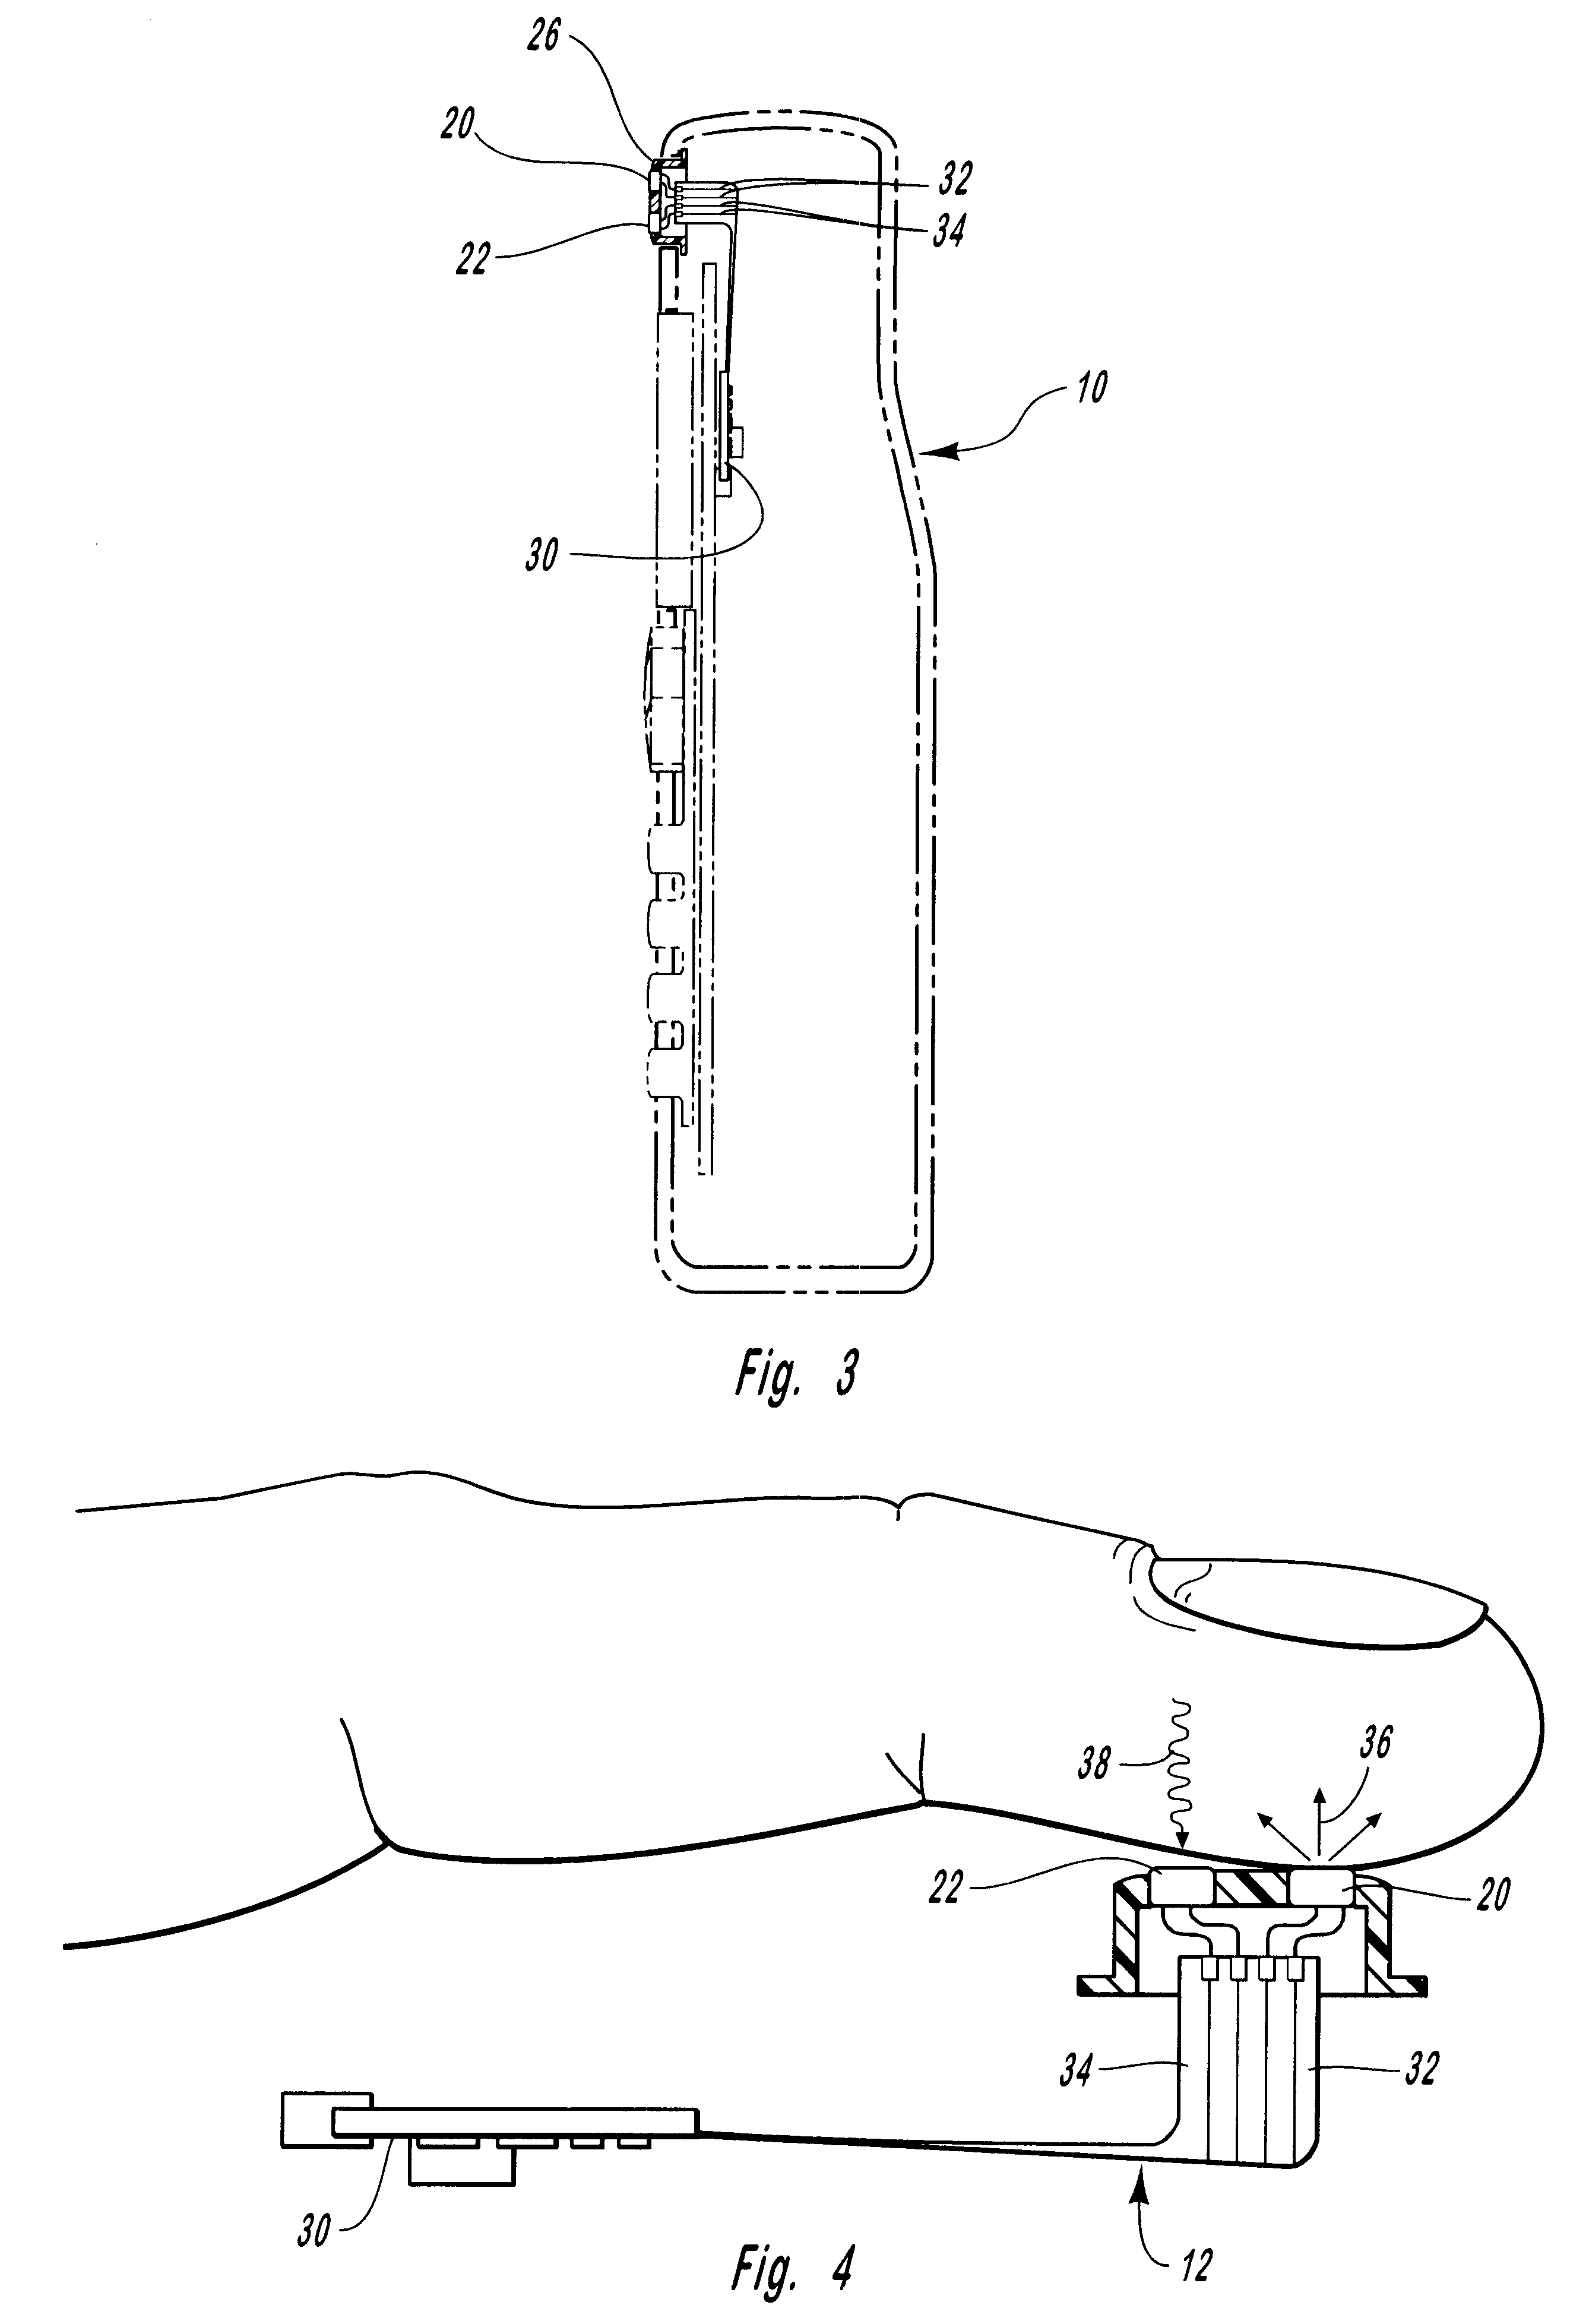 Method and apparatus for histological and physiological biometric operation and authentication